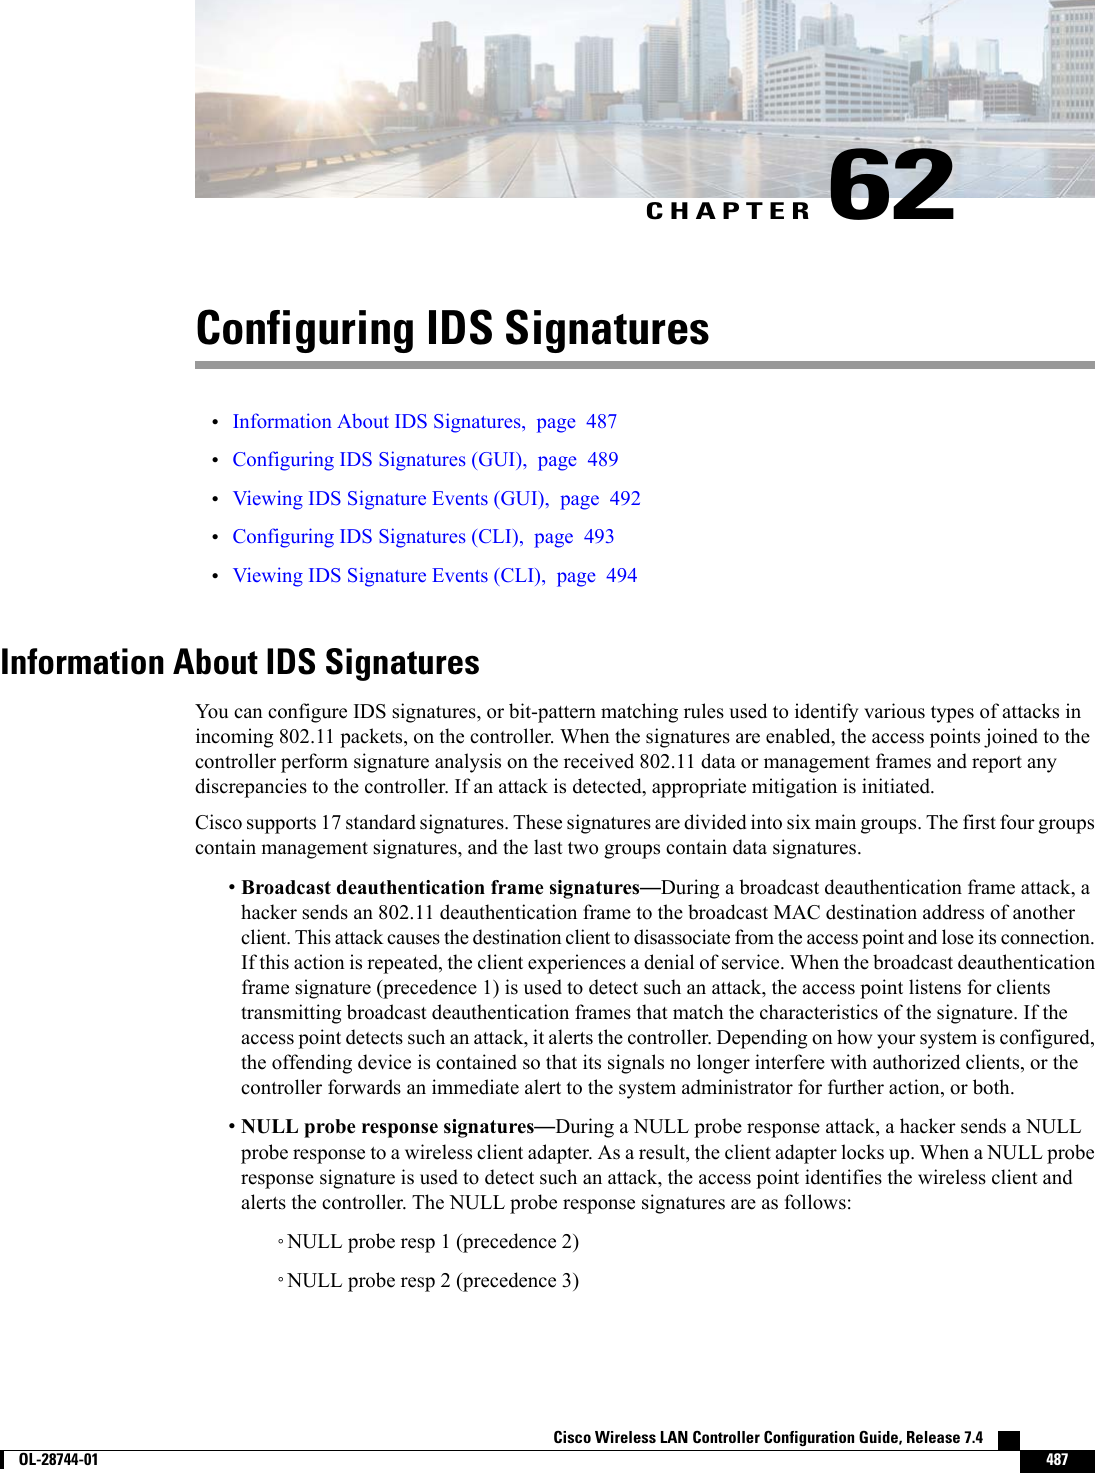 CHAPTER 62Configuring IDS Signatures•Information About IDS Signatures, page 487•Configuring IDS Signatures (GUI), page 489•Viewing IDS Signature Events (GUI), page 492•Configuring IDS Signatures (CLI), page 493•Viewing IDS Signature Events (CLI), page 494Information About IDS SignaturesYou can configure IDS signatures, or bit-pattern matching rules used to identify various types of attacks inincoming 802.11 packets, on the controller. When the signatures are enabled, the access points joined to thecontroller perform signature analysis on the received 802.11 data or management frames and report anydiscrepancies to the controller. If an attack is detected, appropriate mitigation is initiated.Cisco supports 17 standard signatures. These signatures are divided into six main groups. The first four groupscontain management signatures, and the last two groups contain data signatures.•Broadcast deauthentication frame signatures—During a broadcast deauthentication frame attack, ahacker sends an 802.11 deauthentication frame to the broadcast MAC destination address of anotherclient. This attack causes the destination client to disassociate from the access point and lose its connection.If this action is repeated, the client experiences a denial of service. When the broadcast deauthenticationframe signature (precedence 1) is used to detect such an attack, the access point listens for clientstransmitting broadcast deauthentication frames that match the characteristics of the signature. If theaccess point detects such an attack, it alerts the controller. Depending on how your system is configured,the offending device is contained so that its signals no longer interfere with authorized clients, or thecontroller forwards an immediate alert to the system administrator for further action, or both.•NULL probe response signatures—During a NULL probe response attack, a hacker sends a NULLprobe response to a wireless client adapter. As a result, the client adapter locks up. When a NULL proberesponse signature is used to detect such an attack, the access point identifies the wireless client andalerts the controller. The NULL probe response signatures are as follows:◦NULL probe resp 1 (precedence 2)◦NULL probe resp 2 (precedence 3)Cisco Wireless LAN Controller Configuration Guide, Release 7.4        OL-28744-01 487